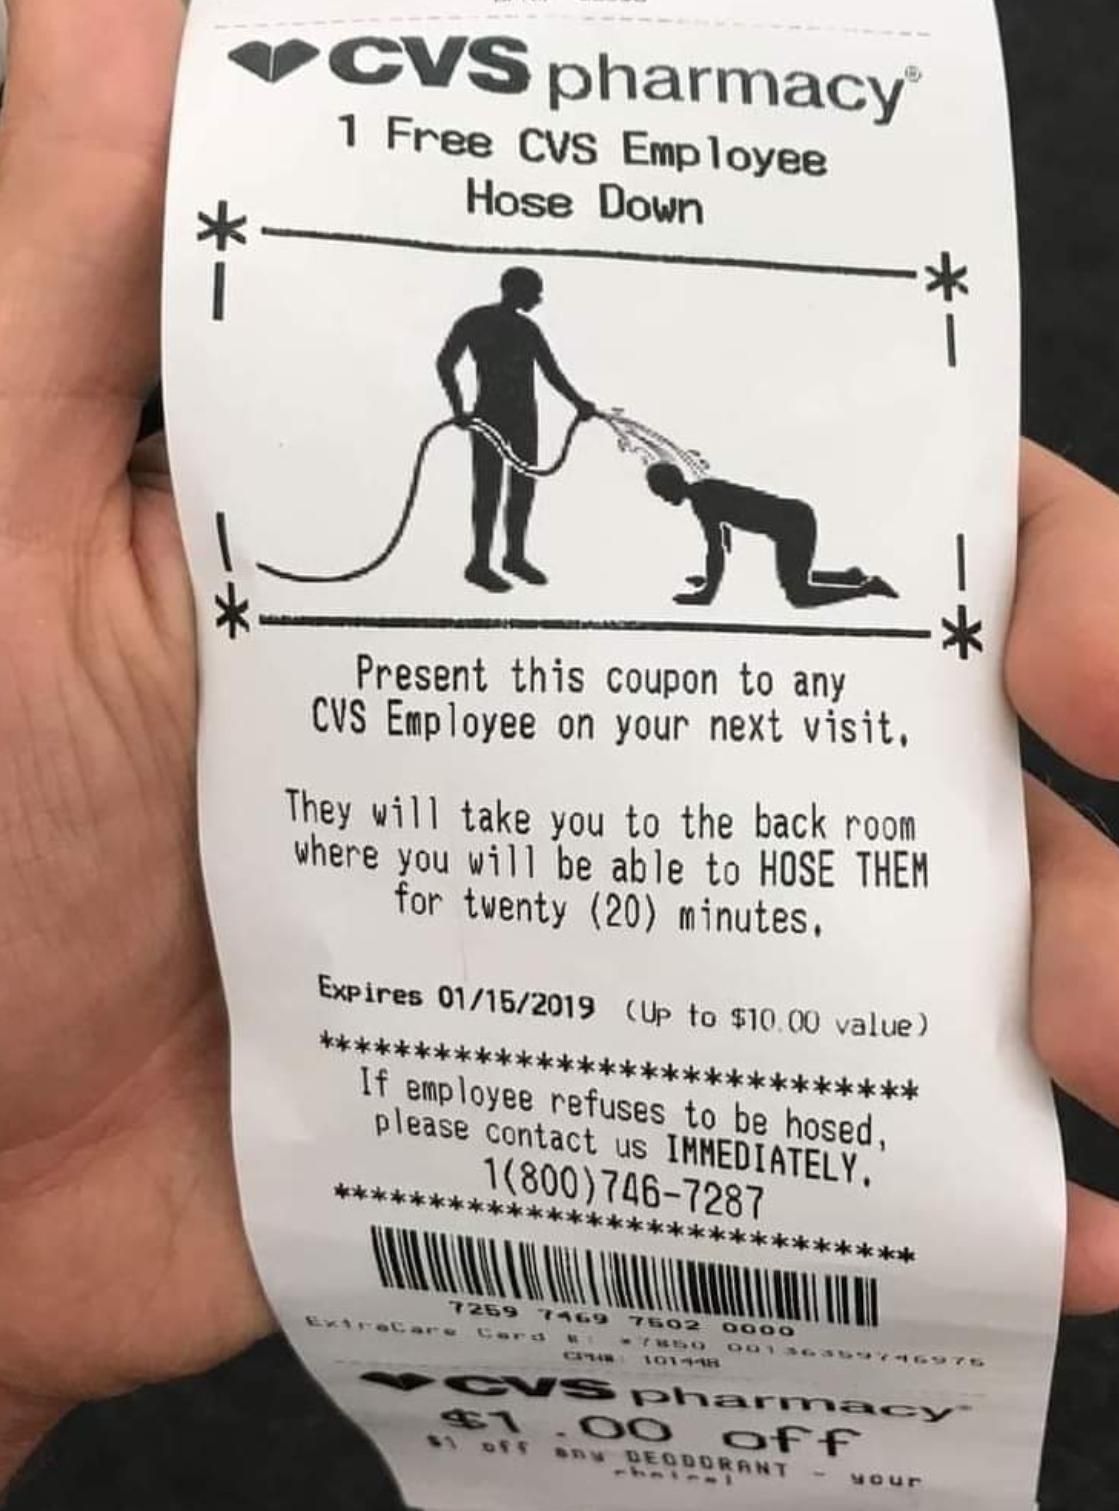 Employee Hose Down coupon?